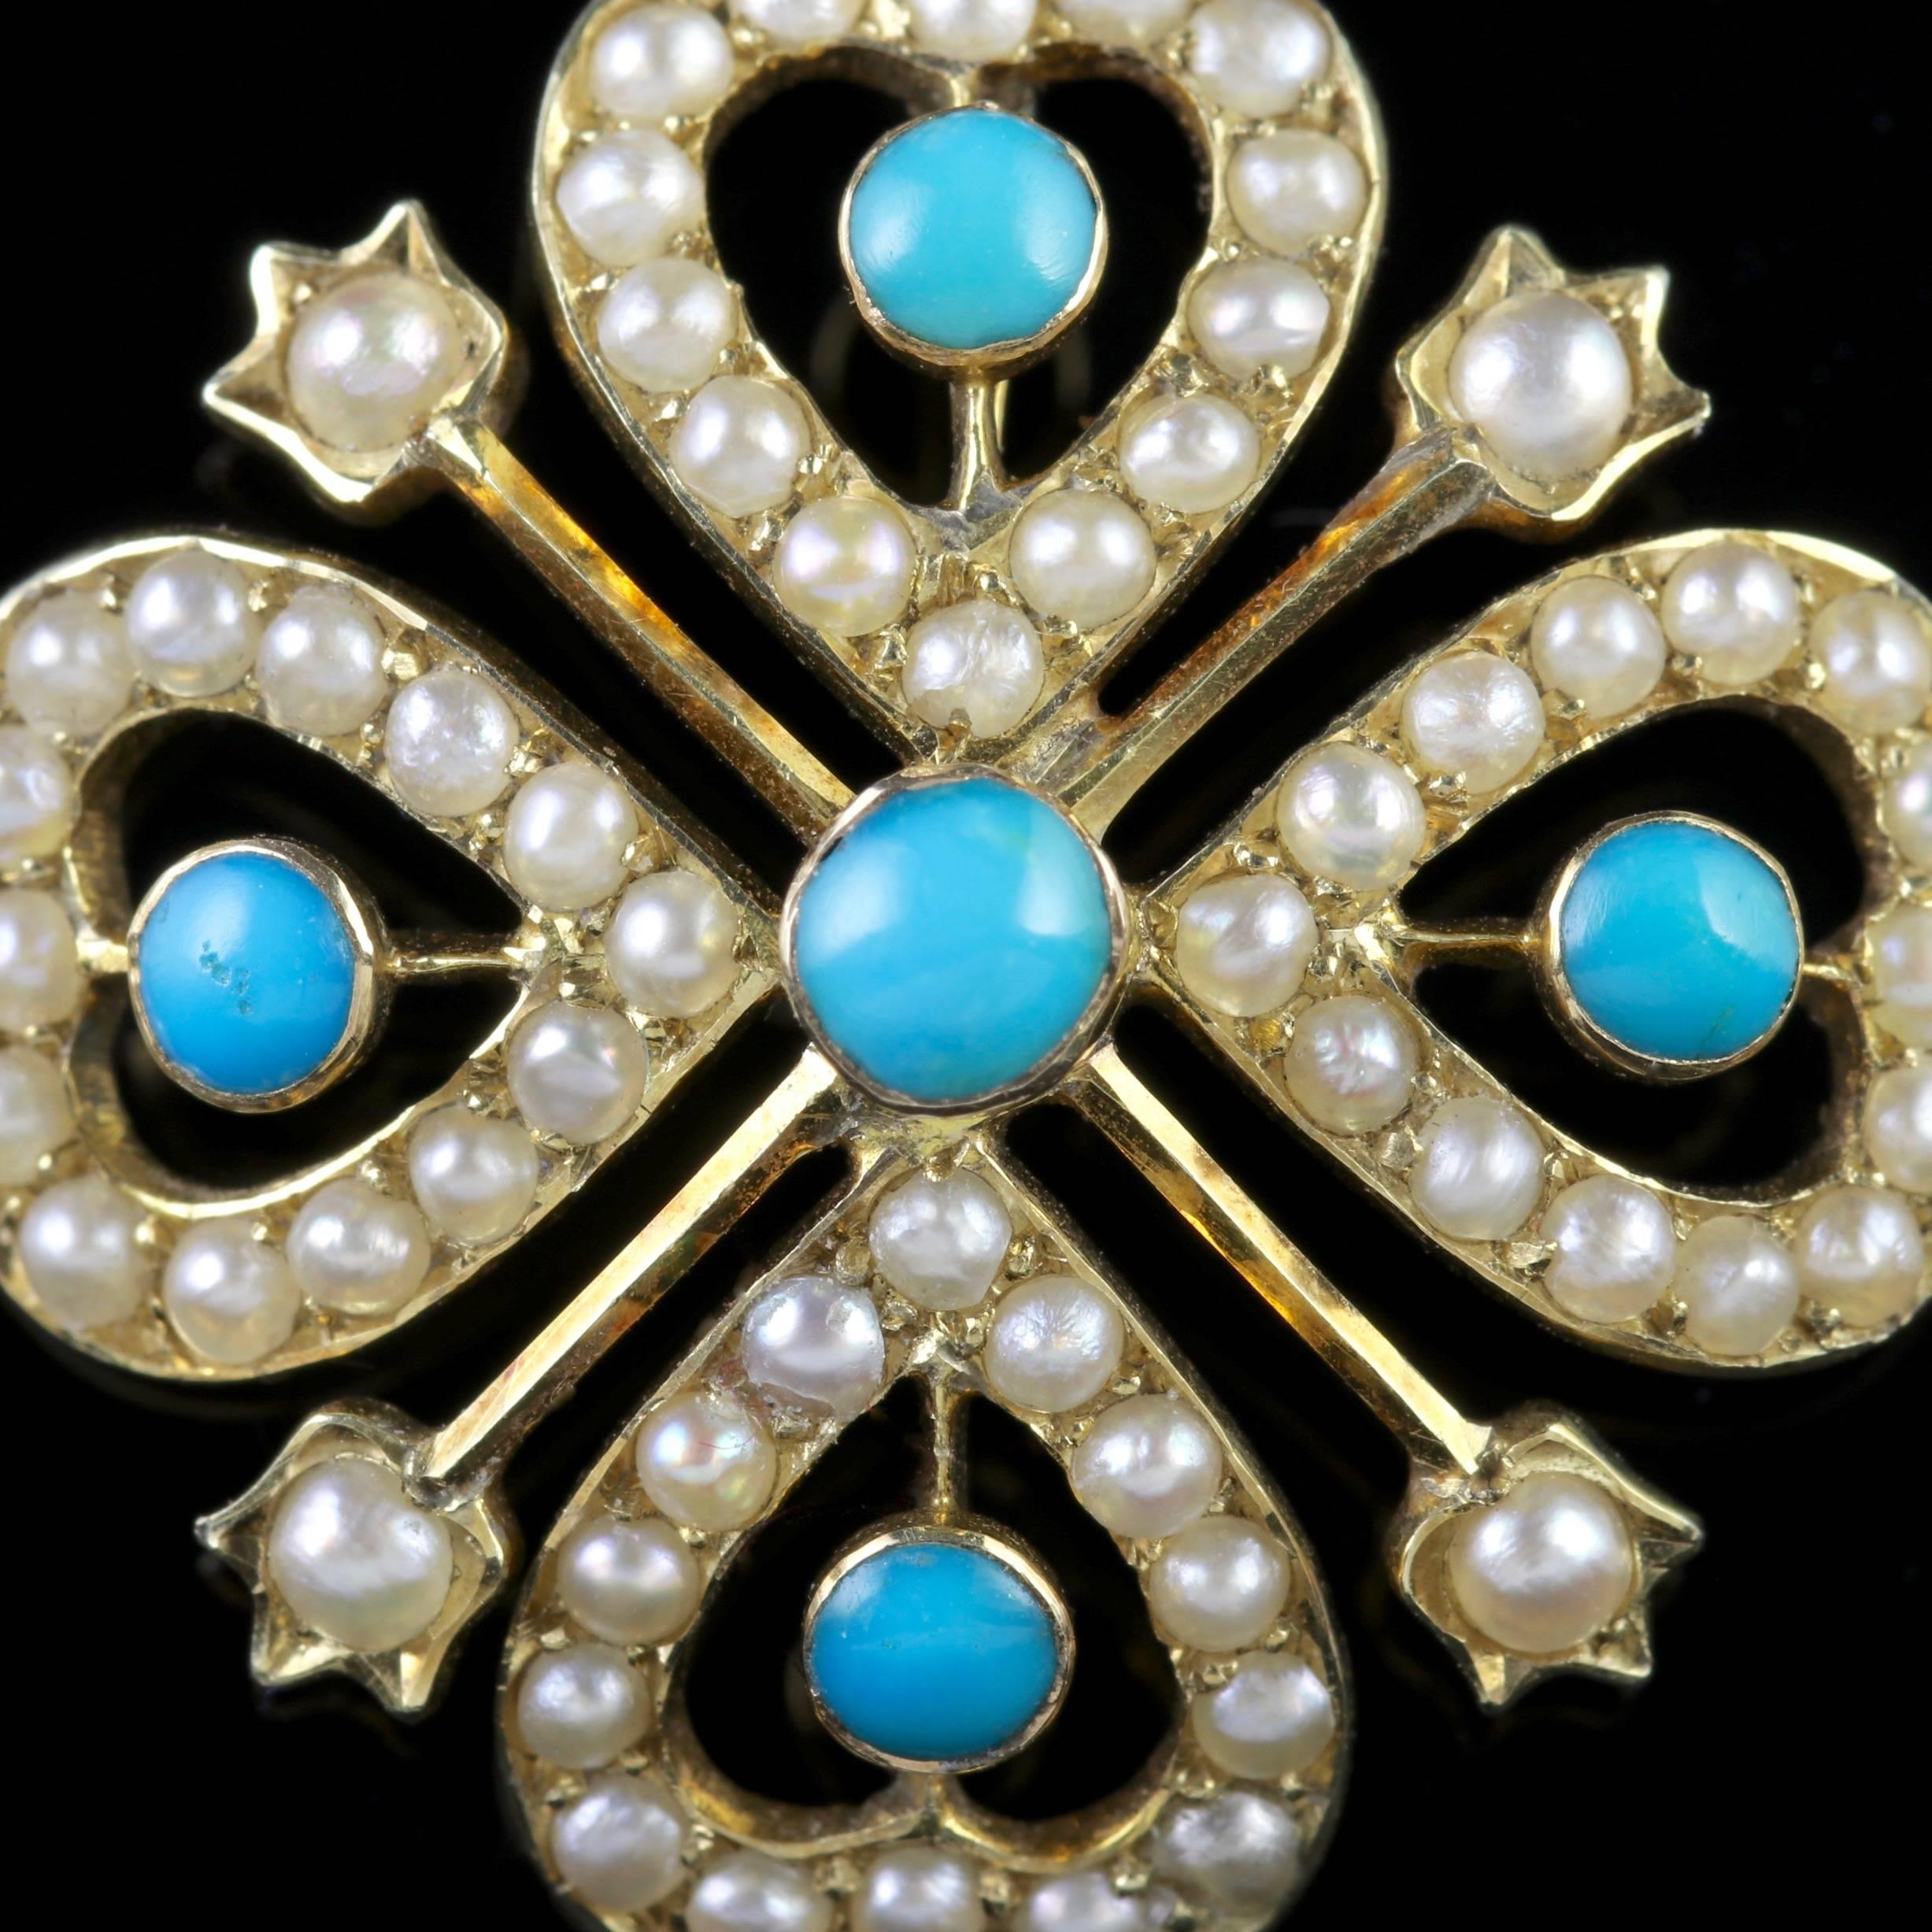 To read more please click continue reading below-

This genuine antique 18ct Yellow Gold Victorian Turquoise and Pearl pendant is Circa 1880.

Five Turquoise stones adorn this lovely pendant and complimented by rich creamy Pearls.

The Turquoise is